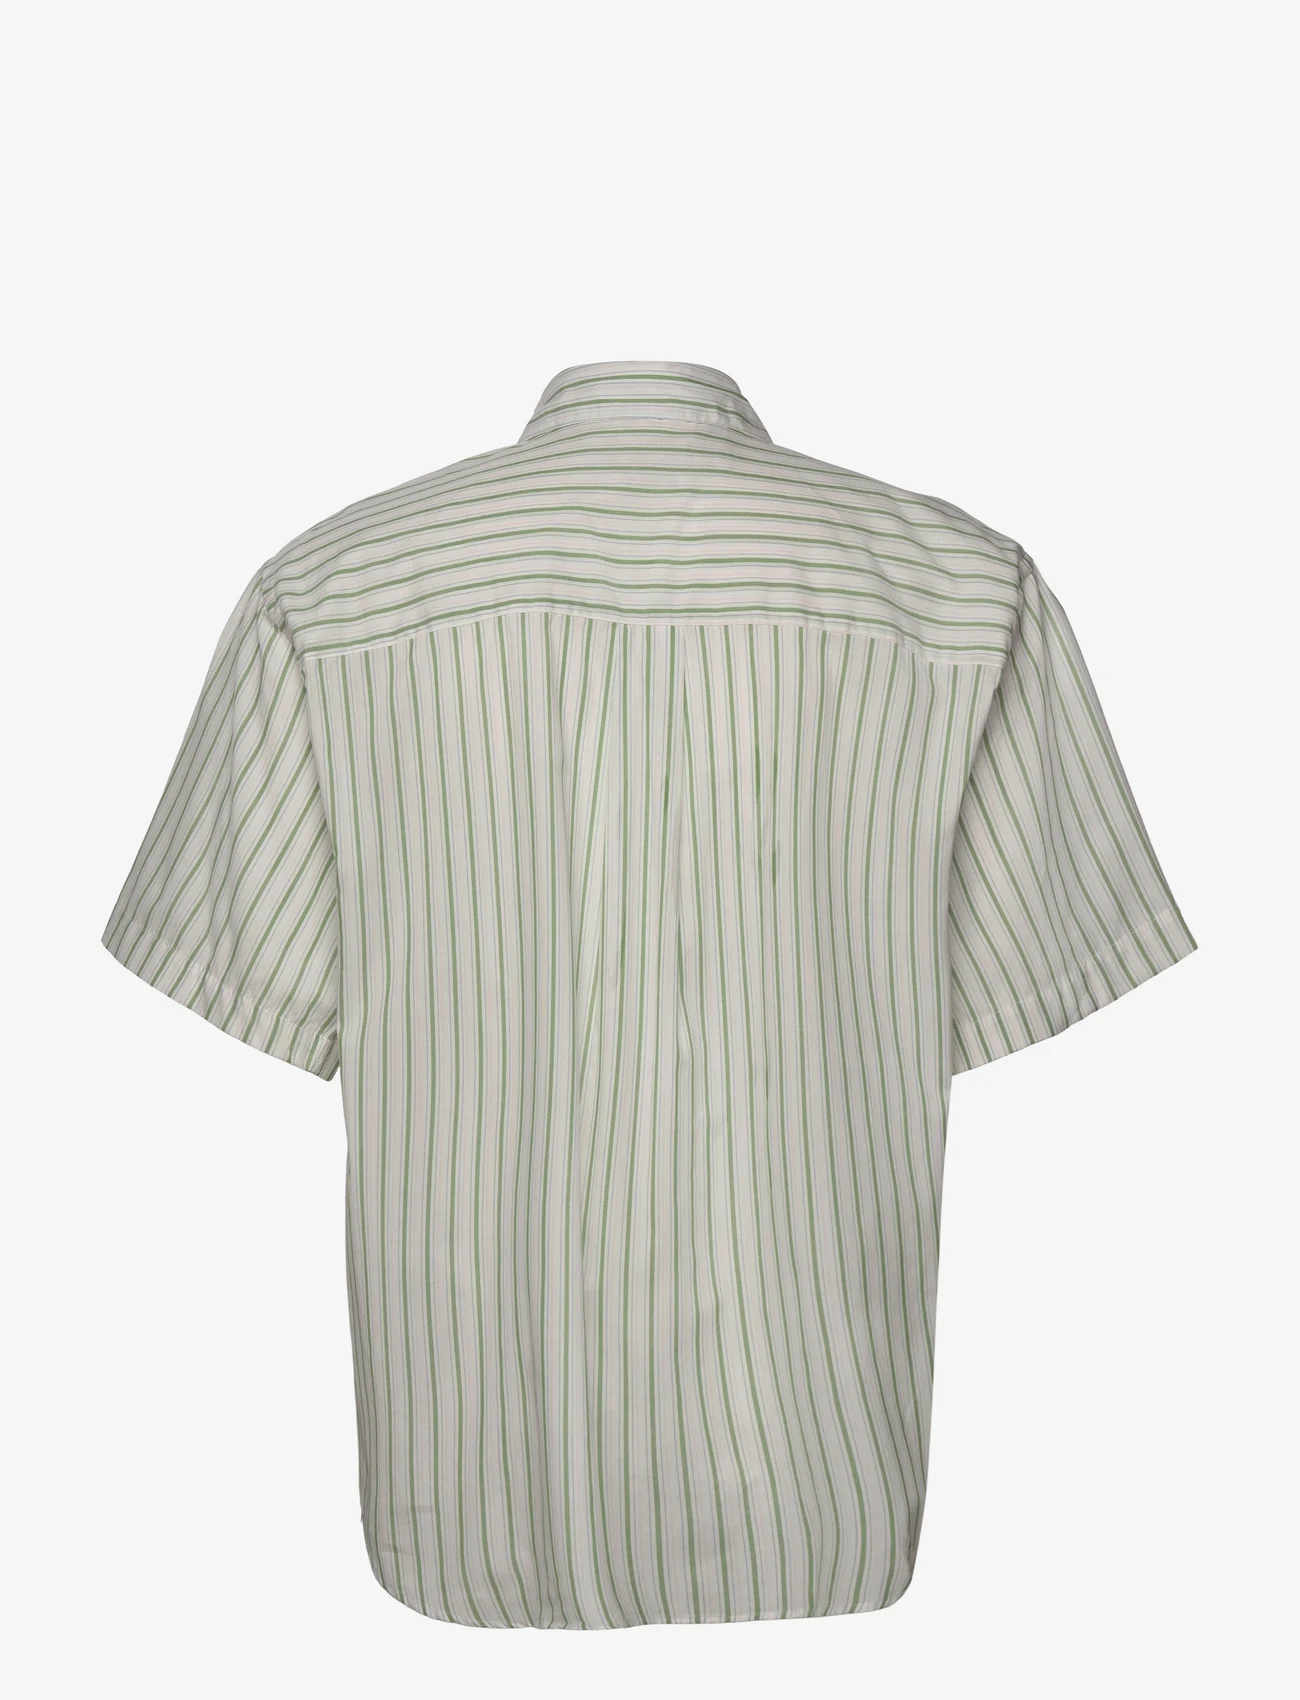 Schnayderman's - SHIRT OVERSIZED SS STRIPE - short-sleeved shirts - white, green and pink - 1